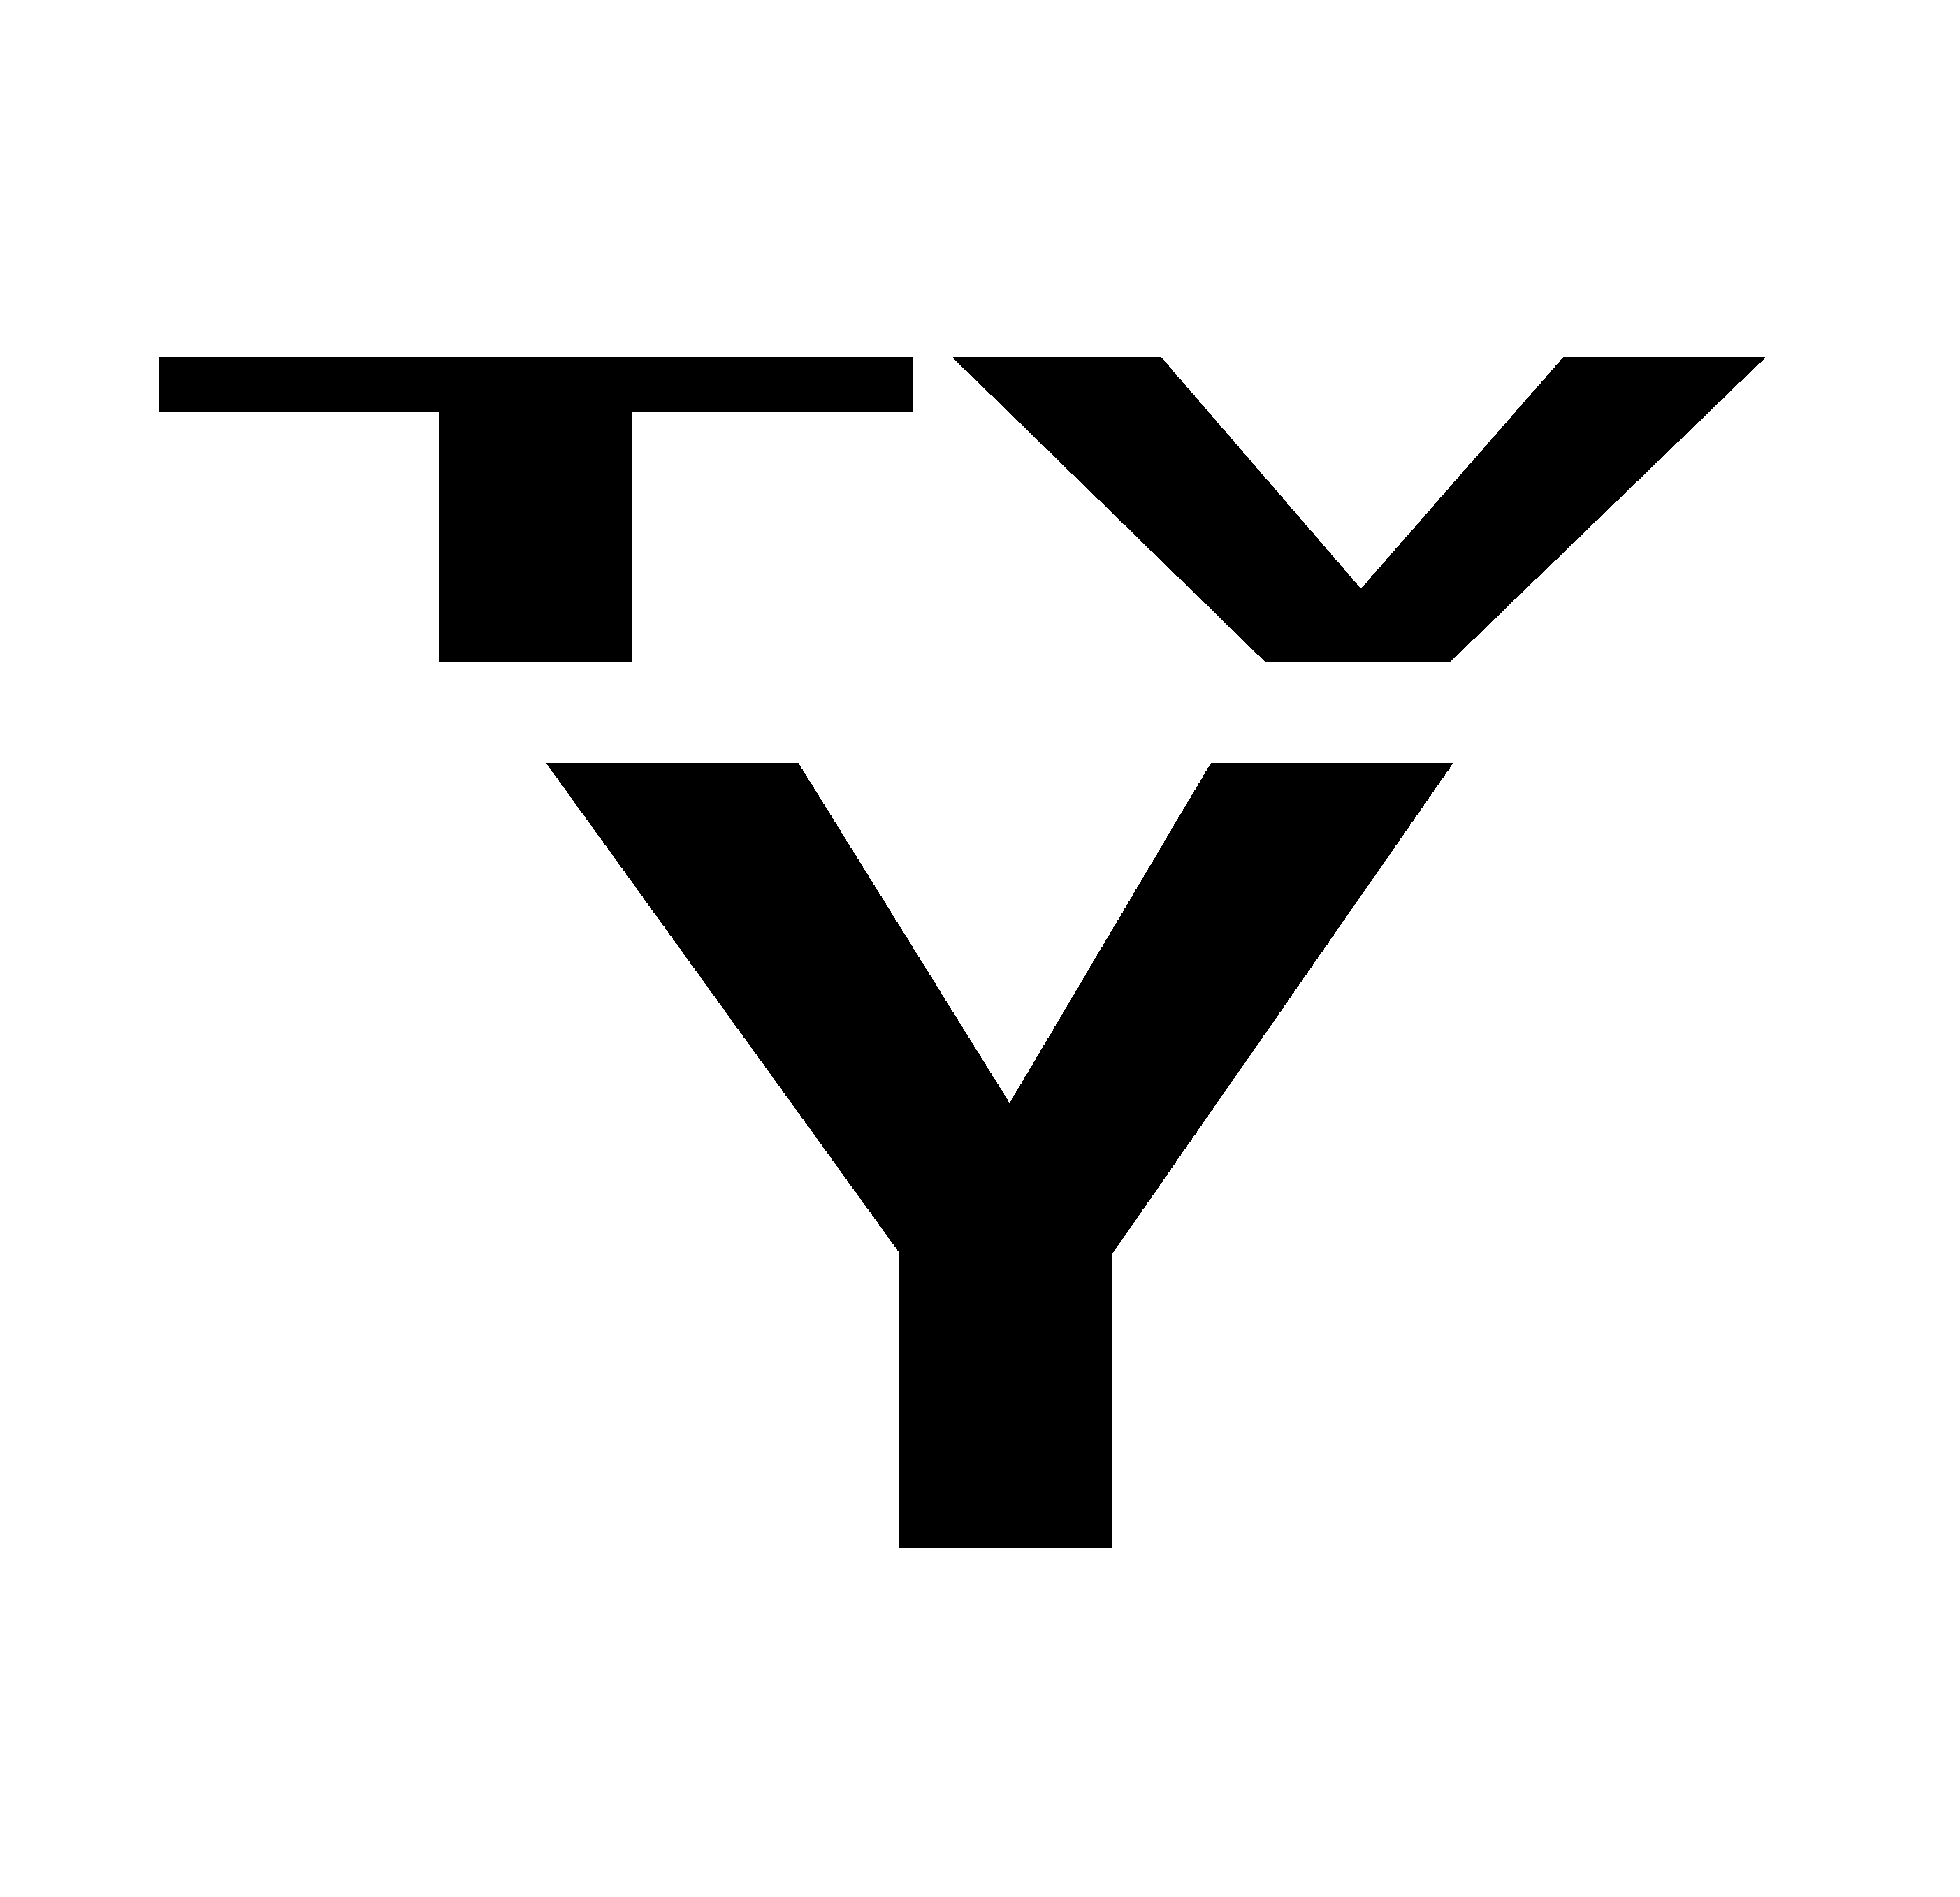 TV Y CC Logo - File:White TV-Y icon.png - Wikimedia Commons